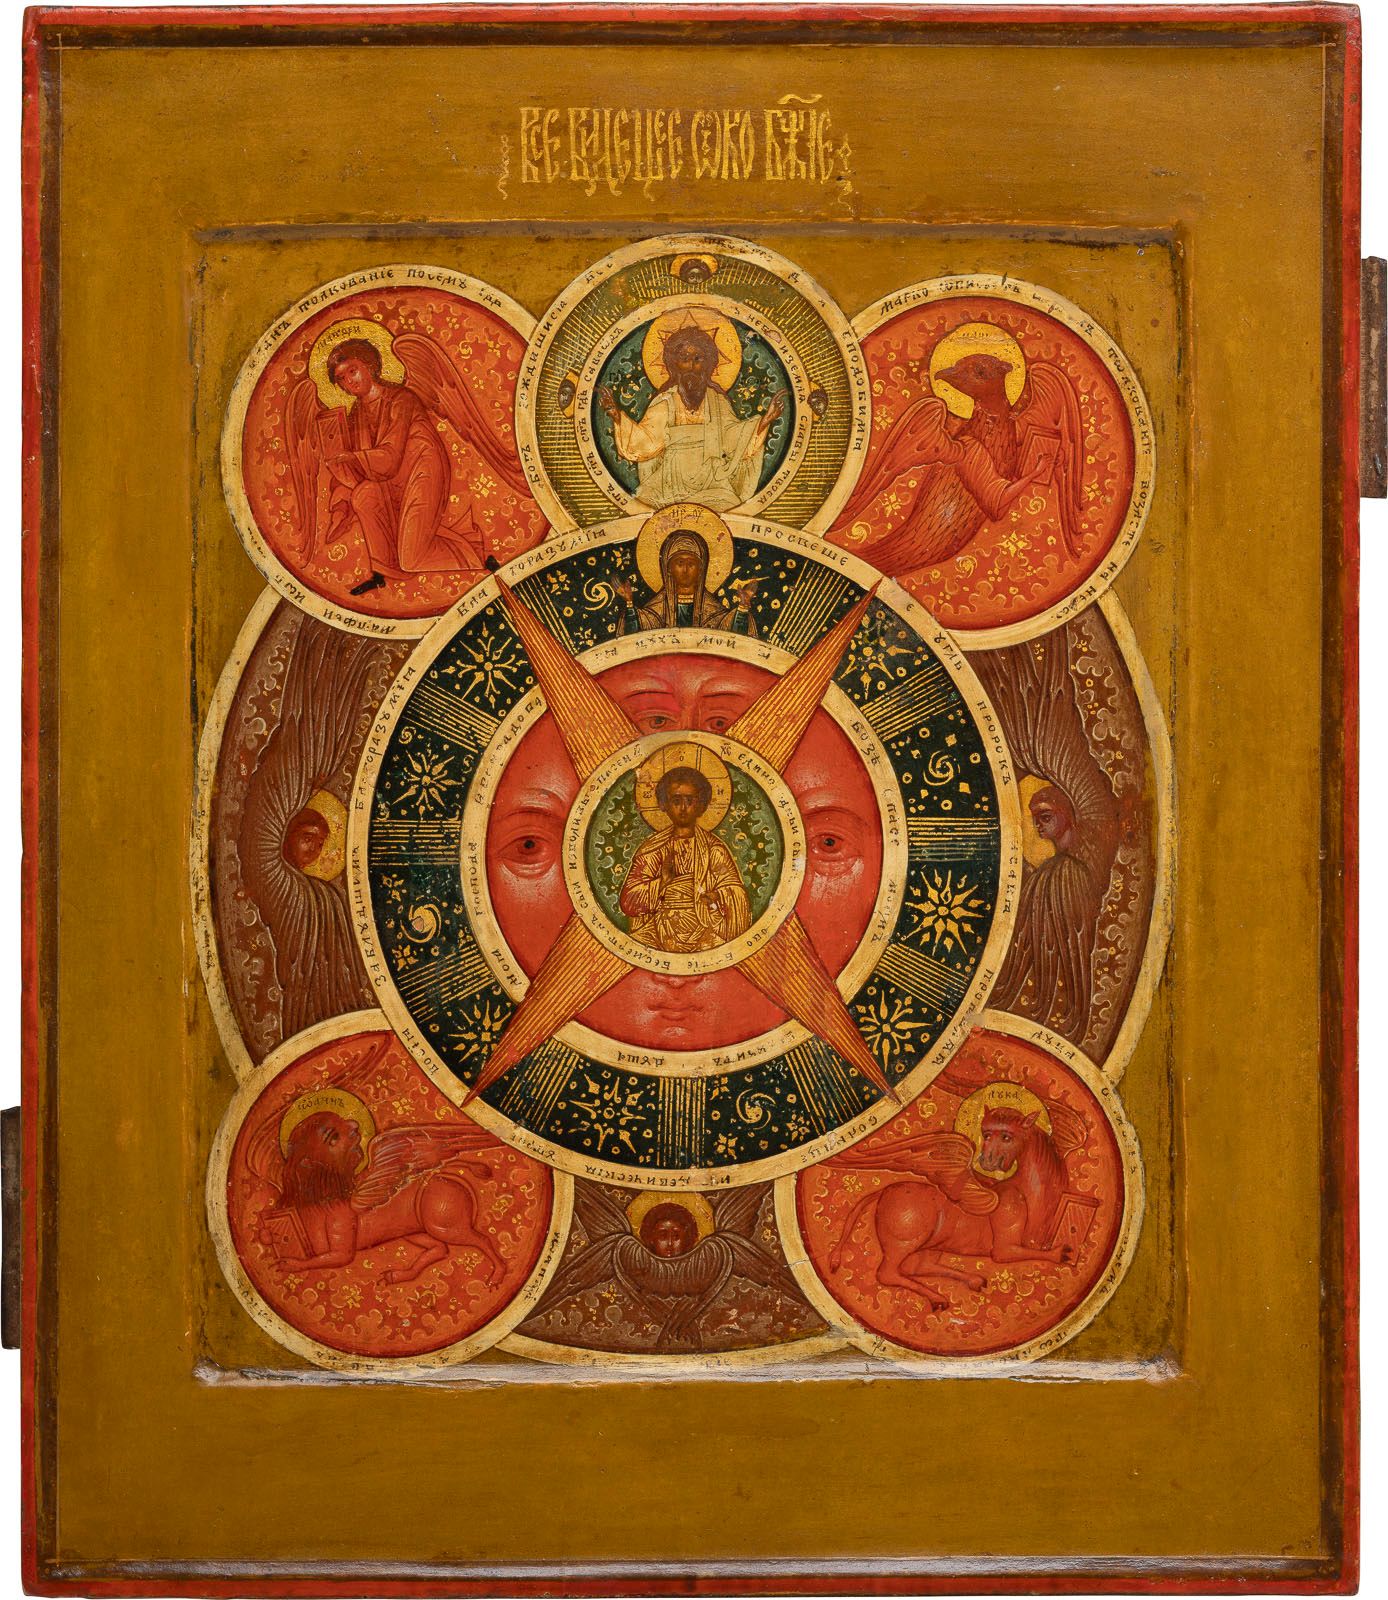 A FINE ICON SHOWING THE 'ALL-SEEING EYE OF GOD' A FINE ICON SHOWING THE 'ALL-SEE&hellip;